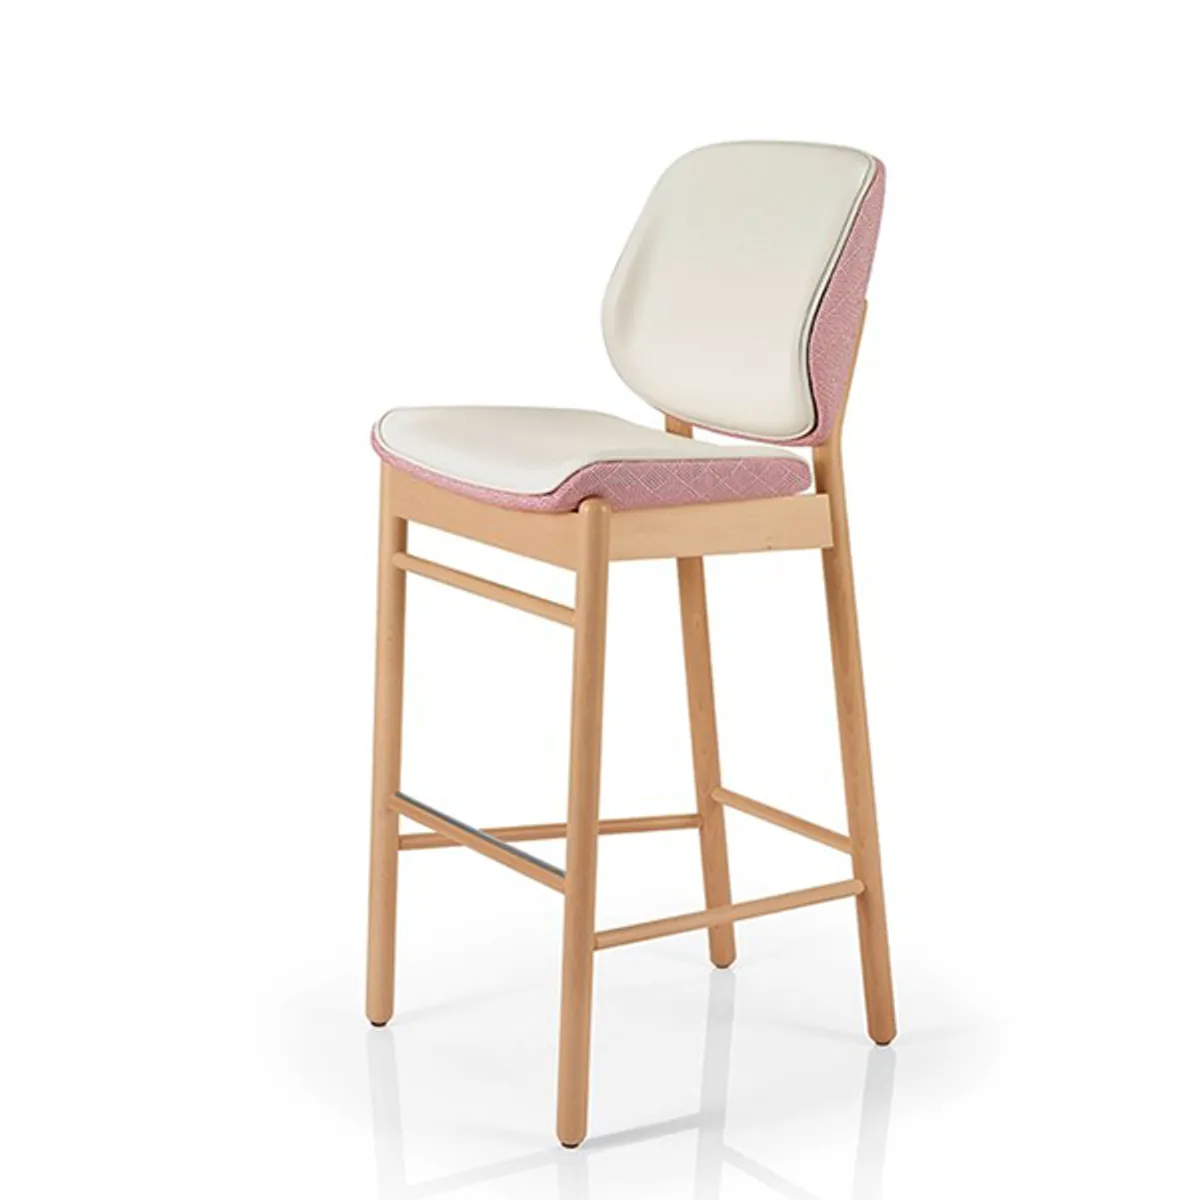 Peggy Bar Stool Hotel Furniture Suppliers Inside Out Contracts